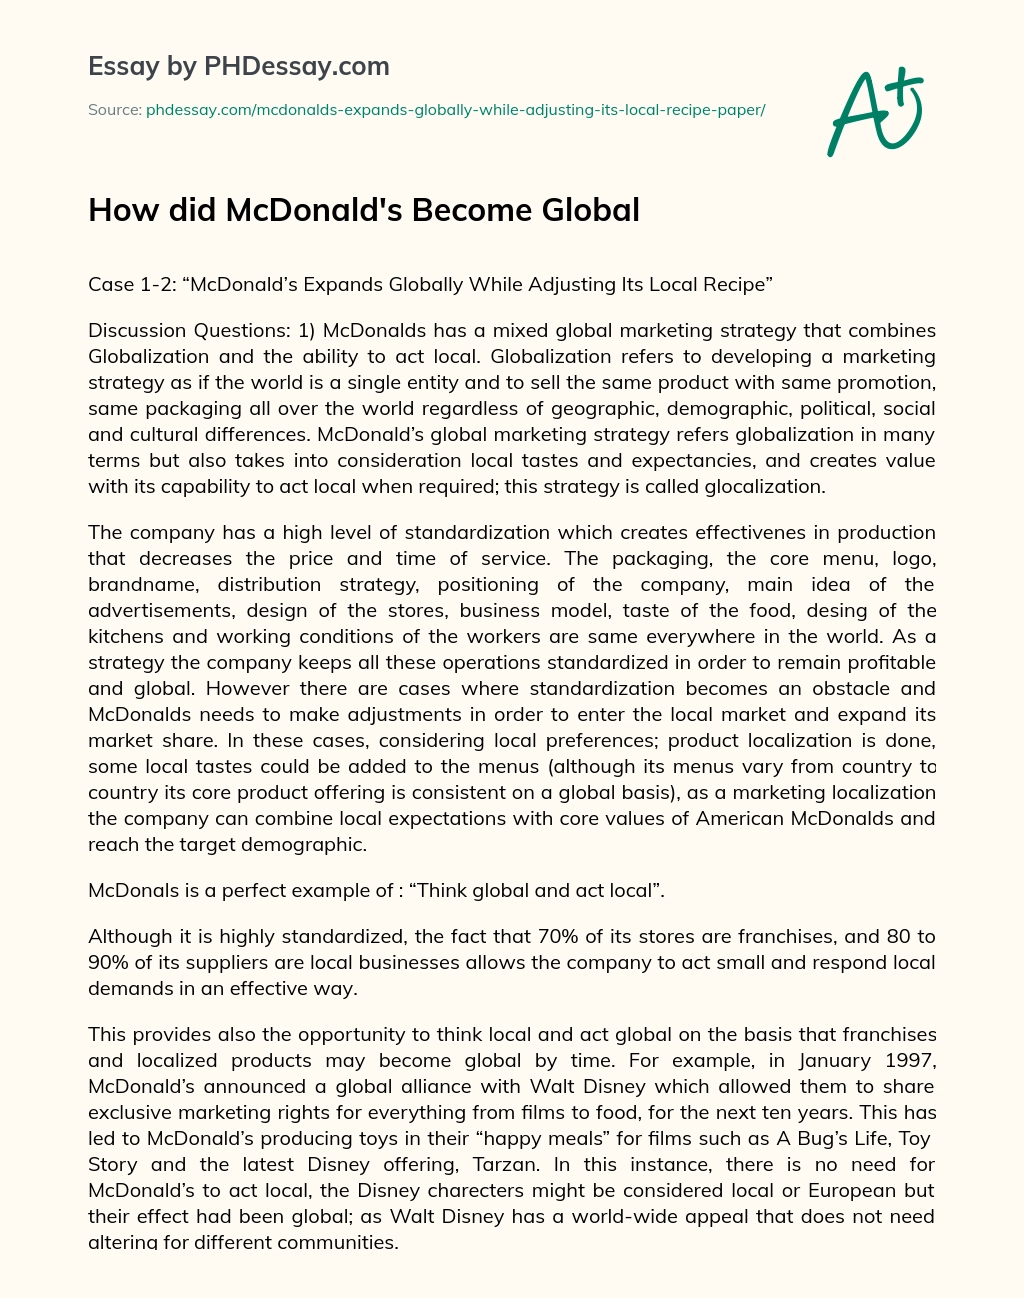 How did McDonald’s Become Global essay